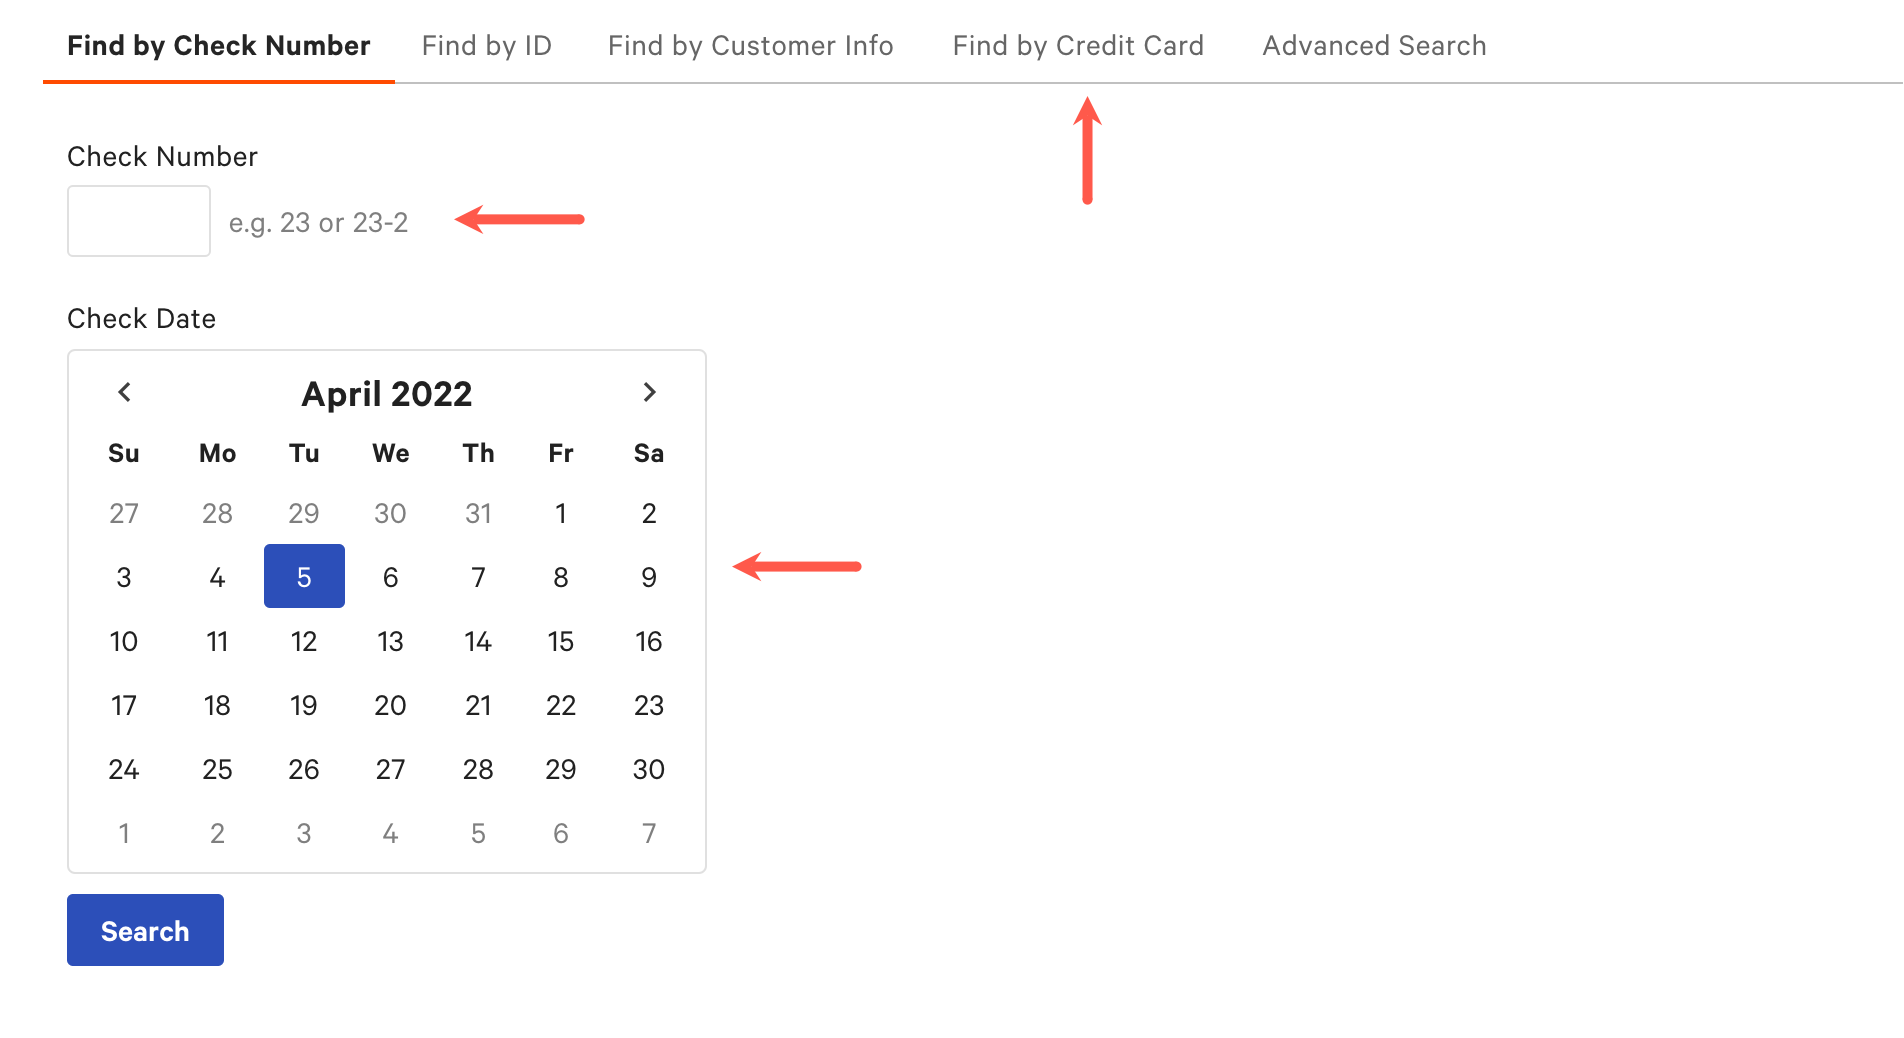 Search screen for checks, with Find by Check Number selected